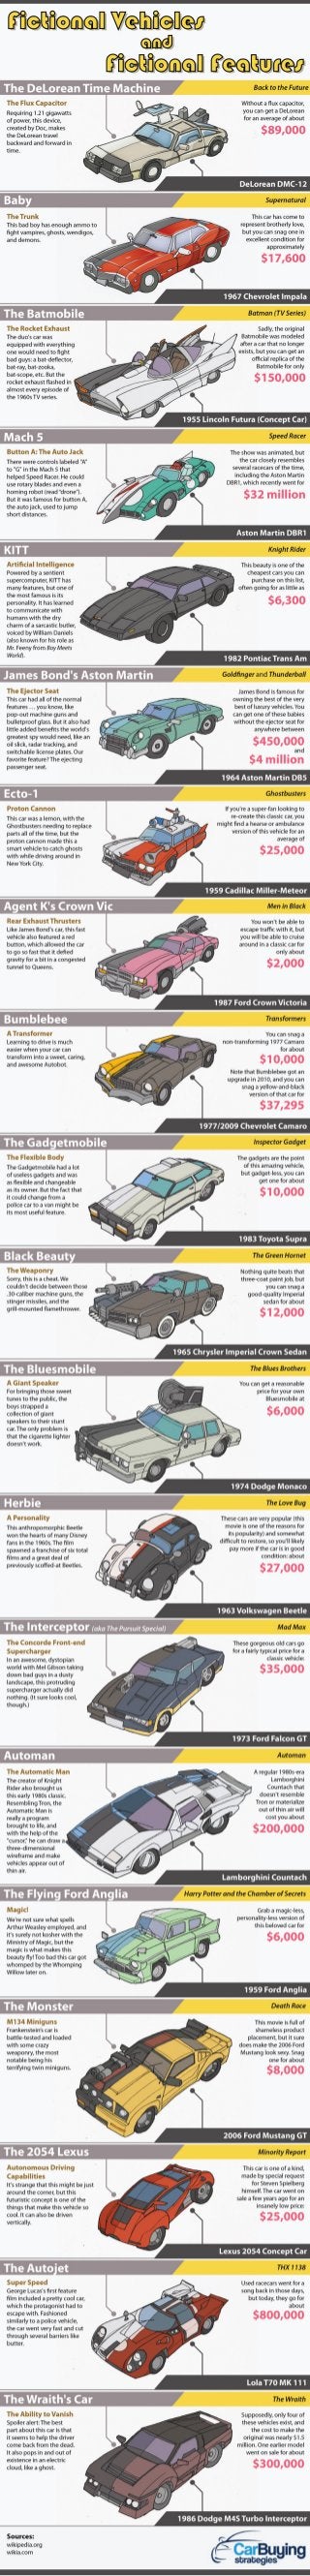 Fictional Cars and Fictional Features